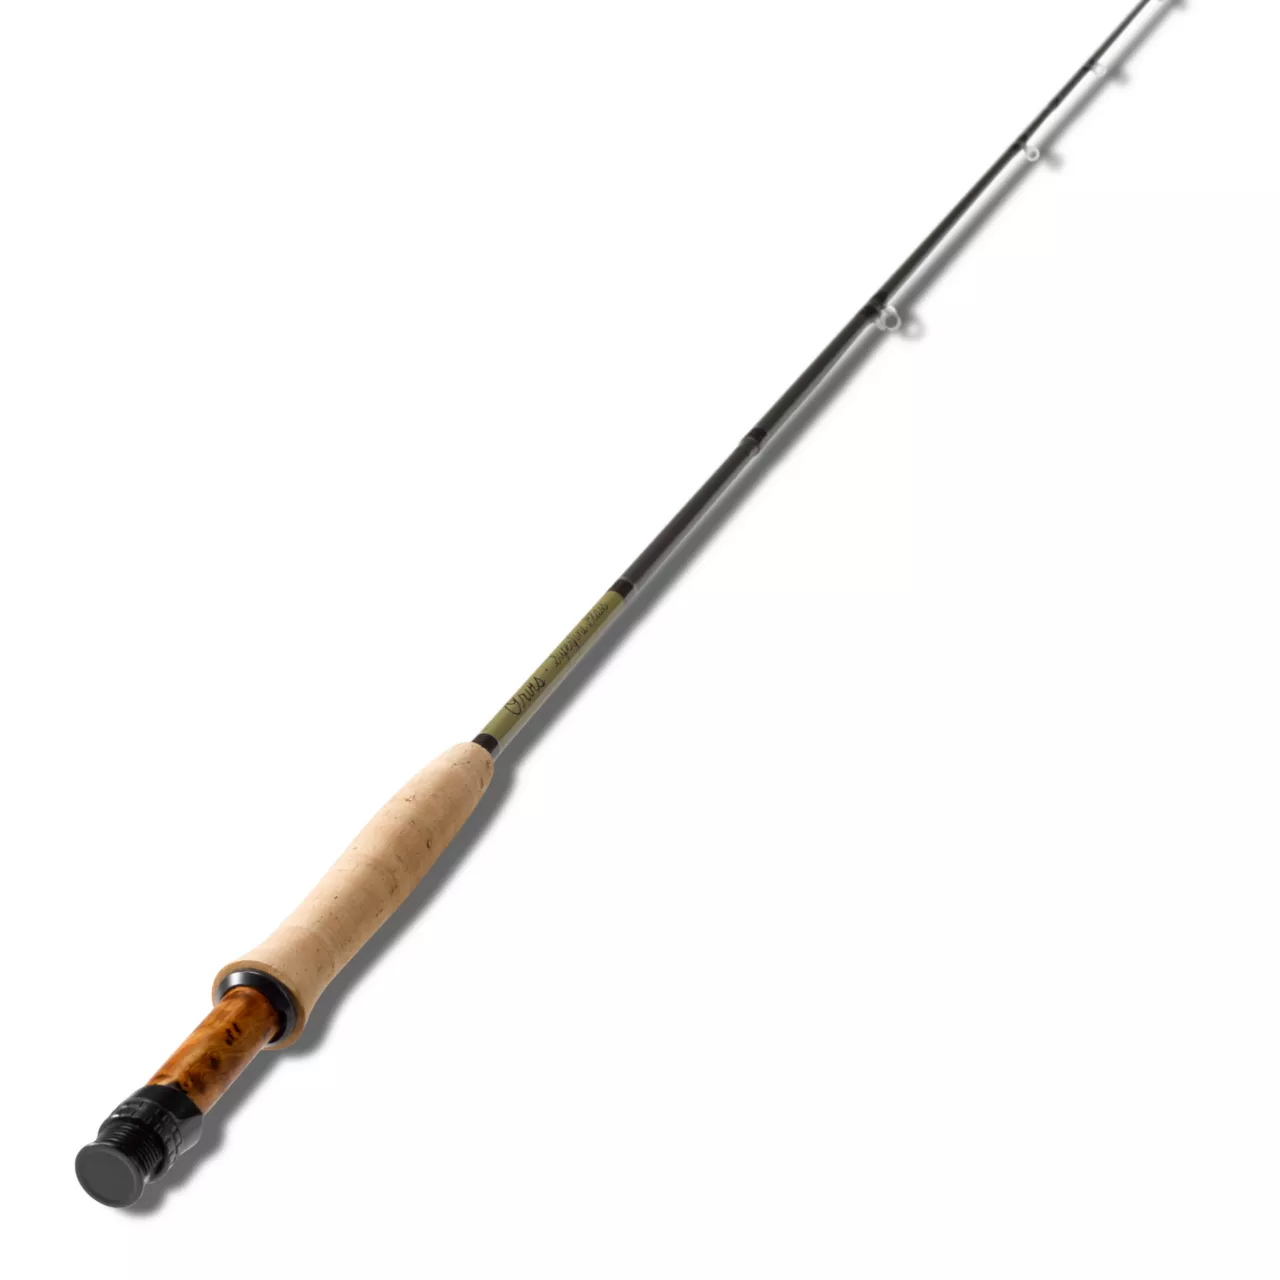 Superfine Glass 3-weight 7'6" Fly Rod